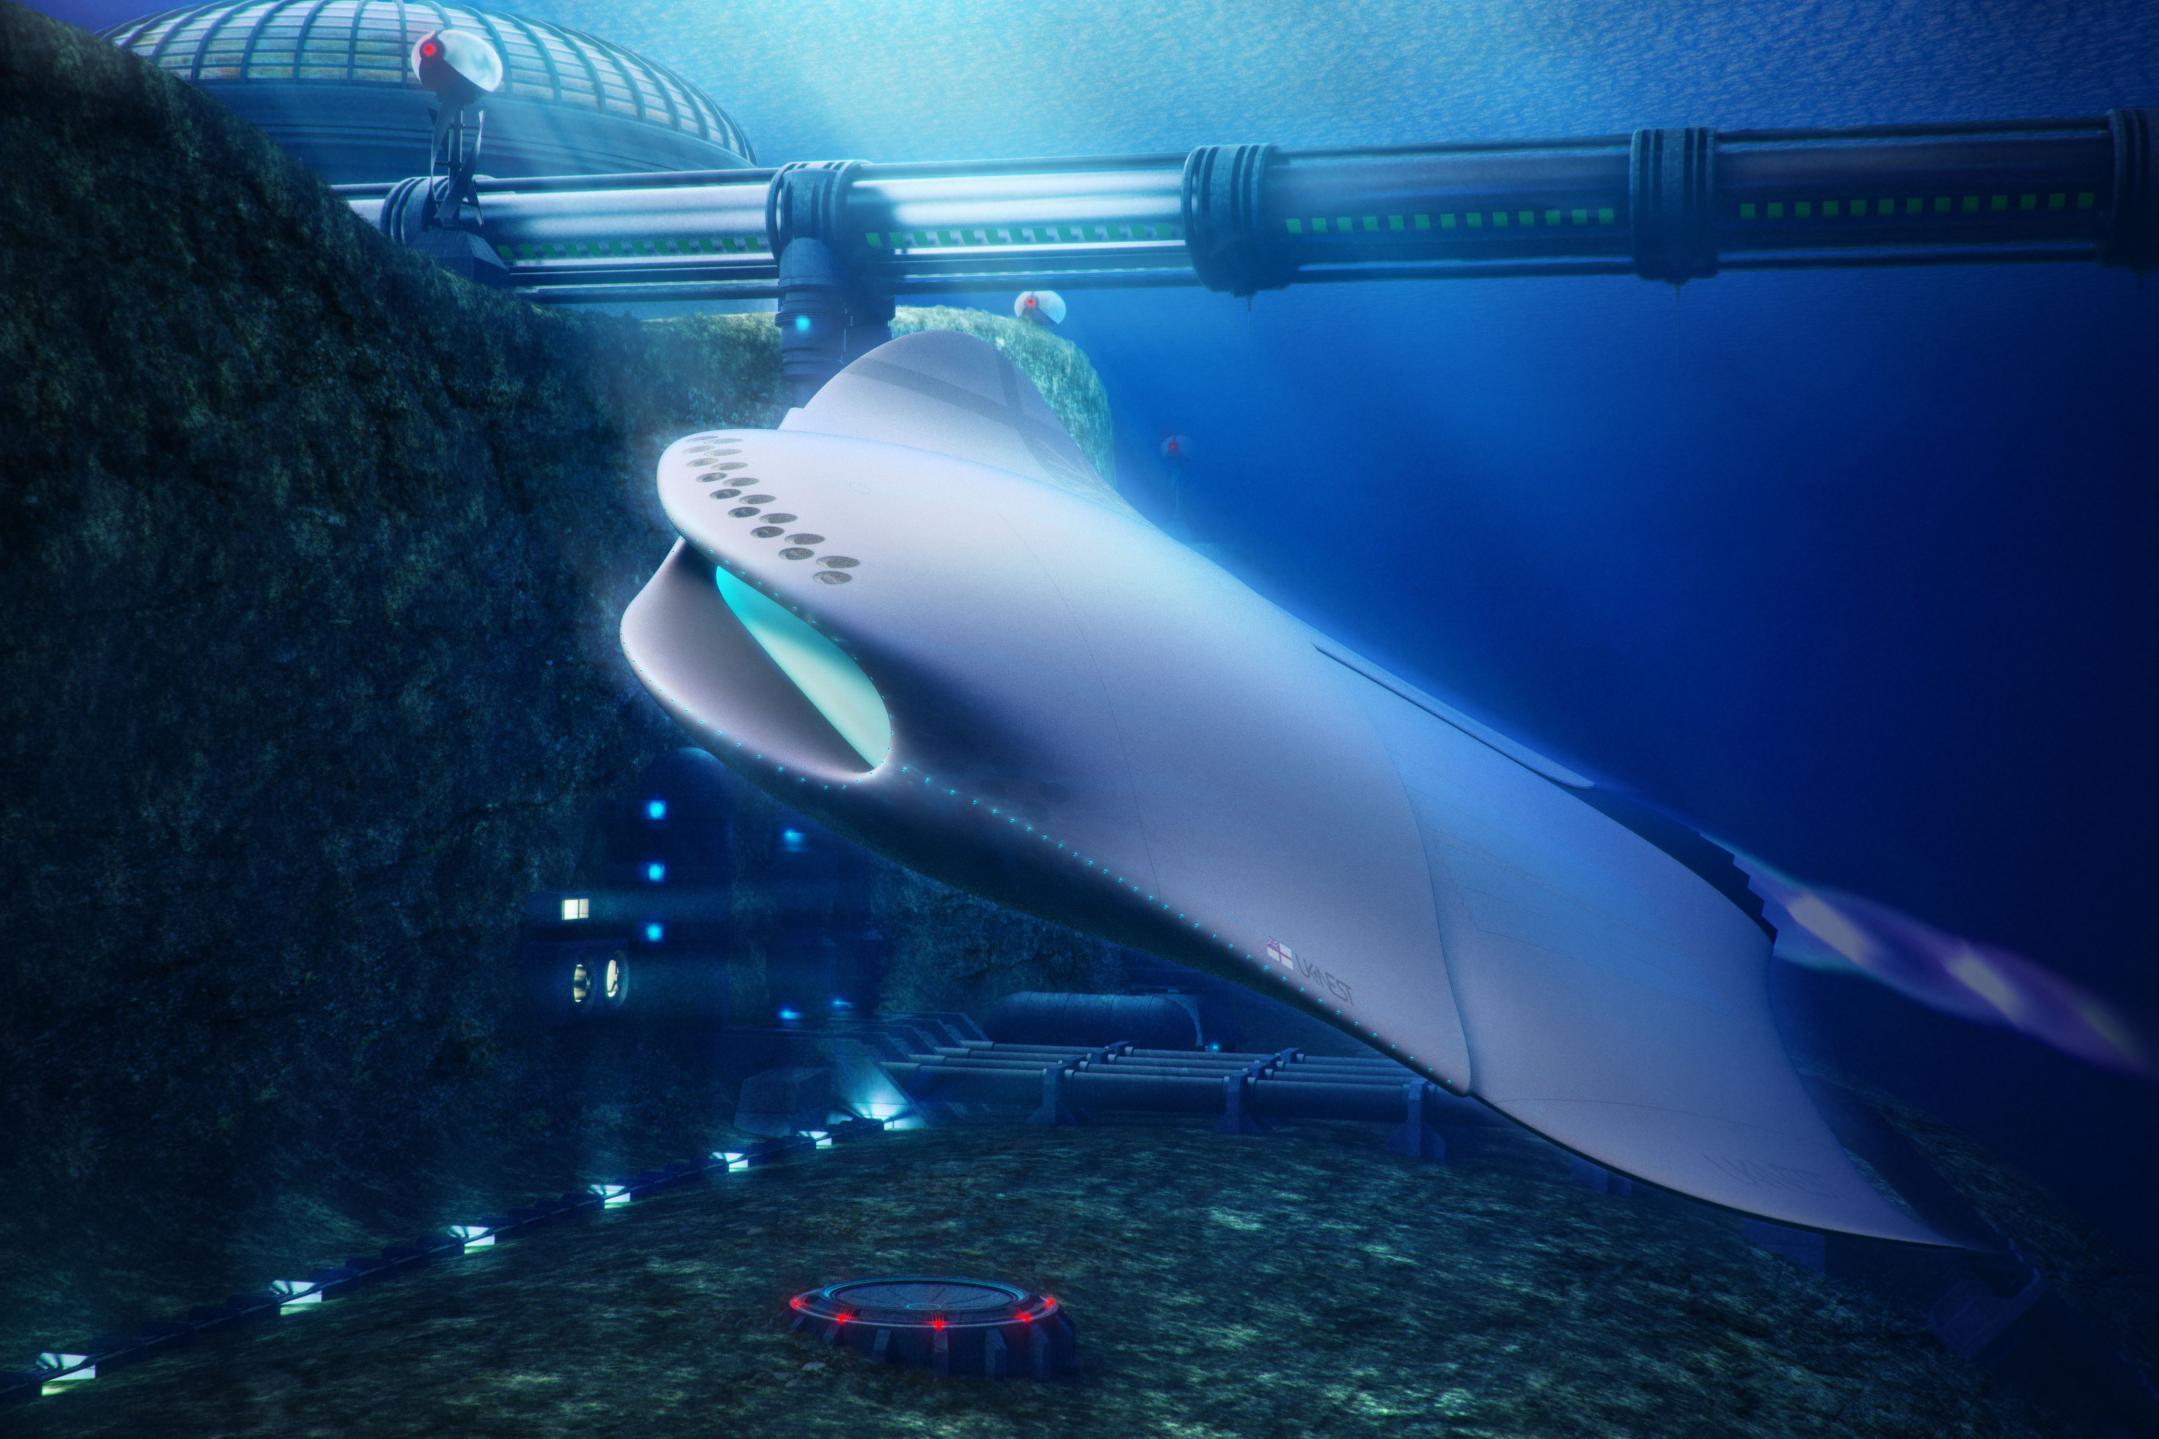 Royal Navy Unveils Futuristic Submarine Design Concepts That Look Like Robot Fish